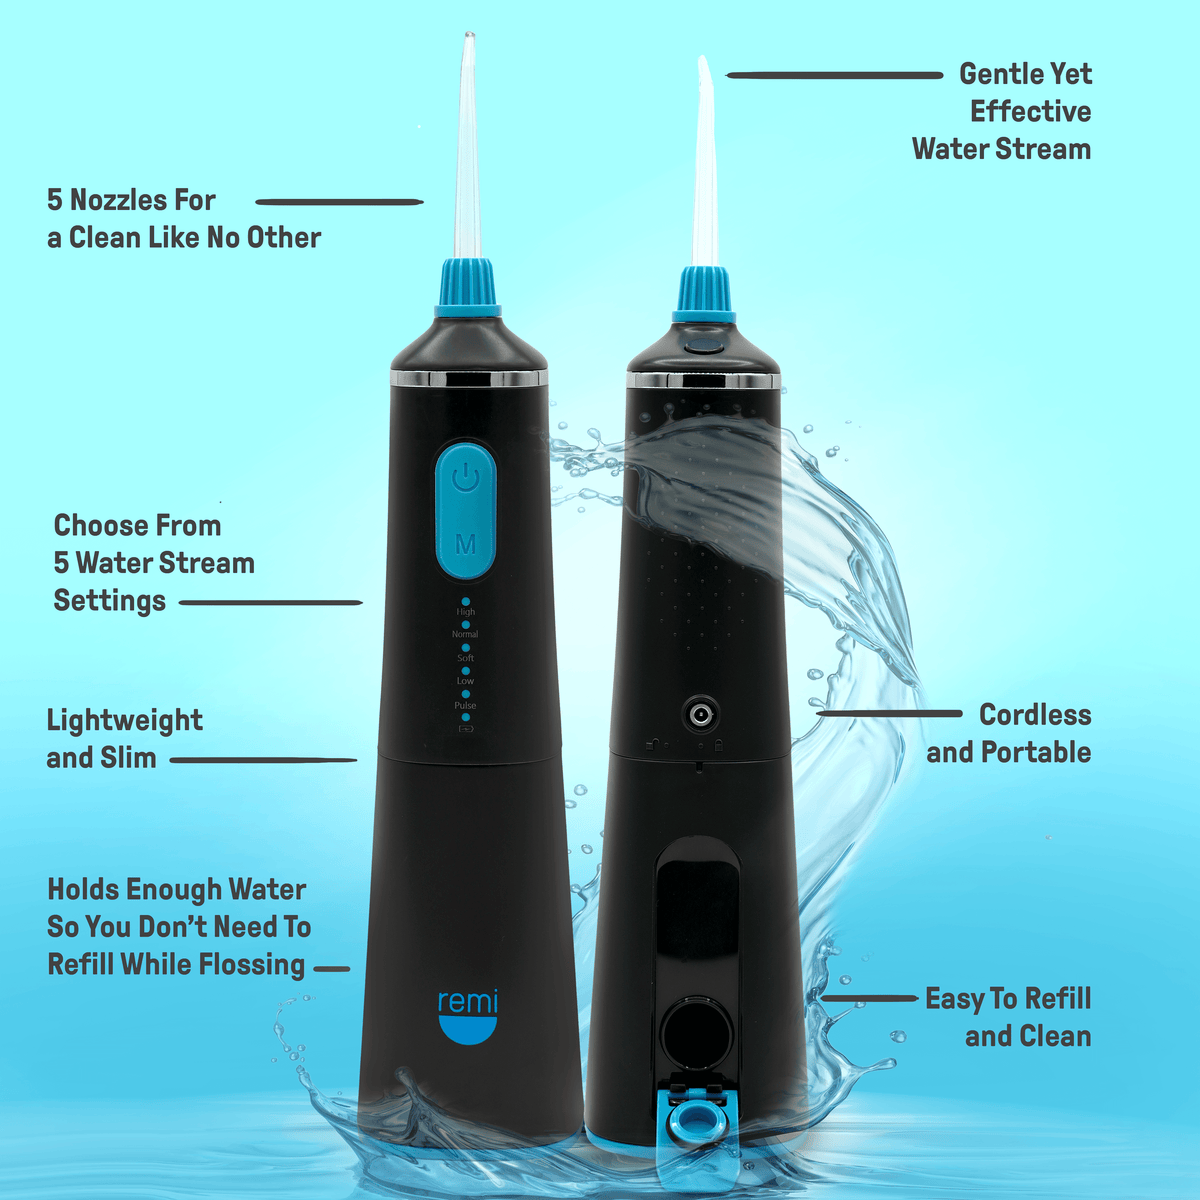 Two Cordless Water Flossers with features highlighted, such as multiple nozzles, adjustable water stream settings for effective plaque removal, lightweight design, and easy refill capability.